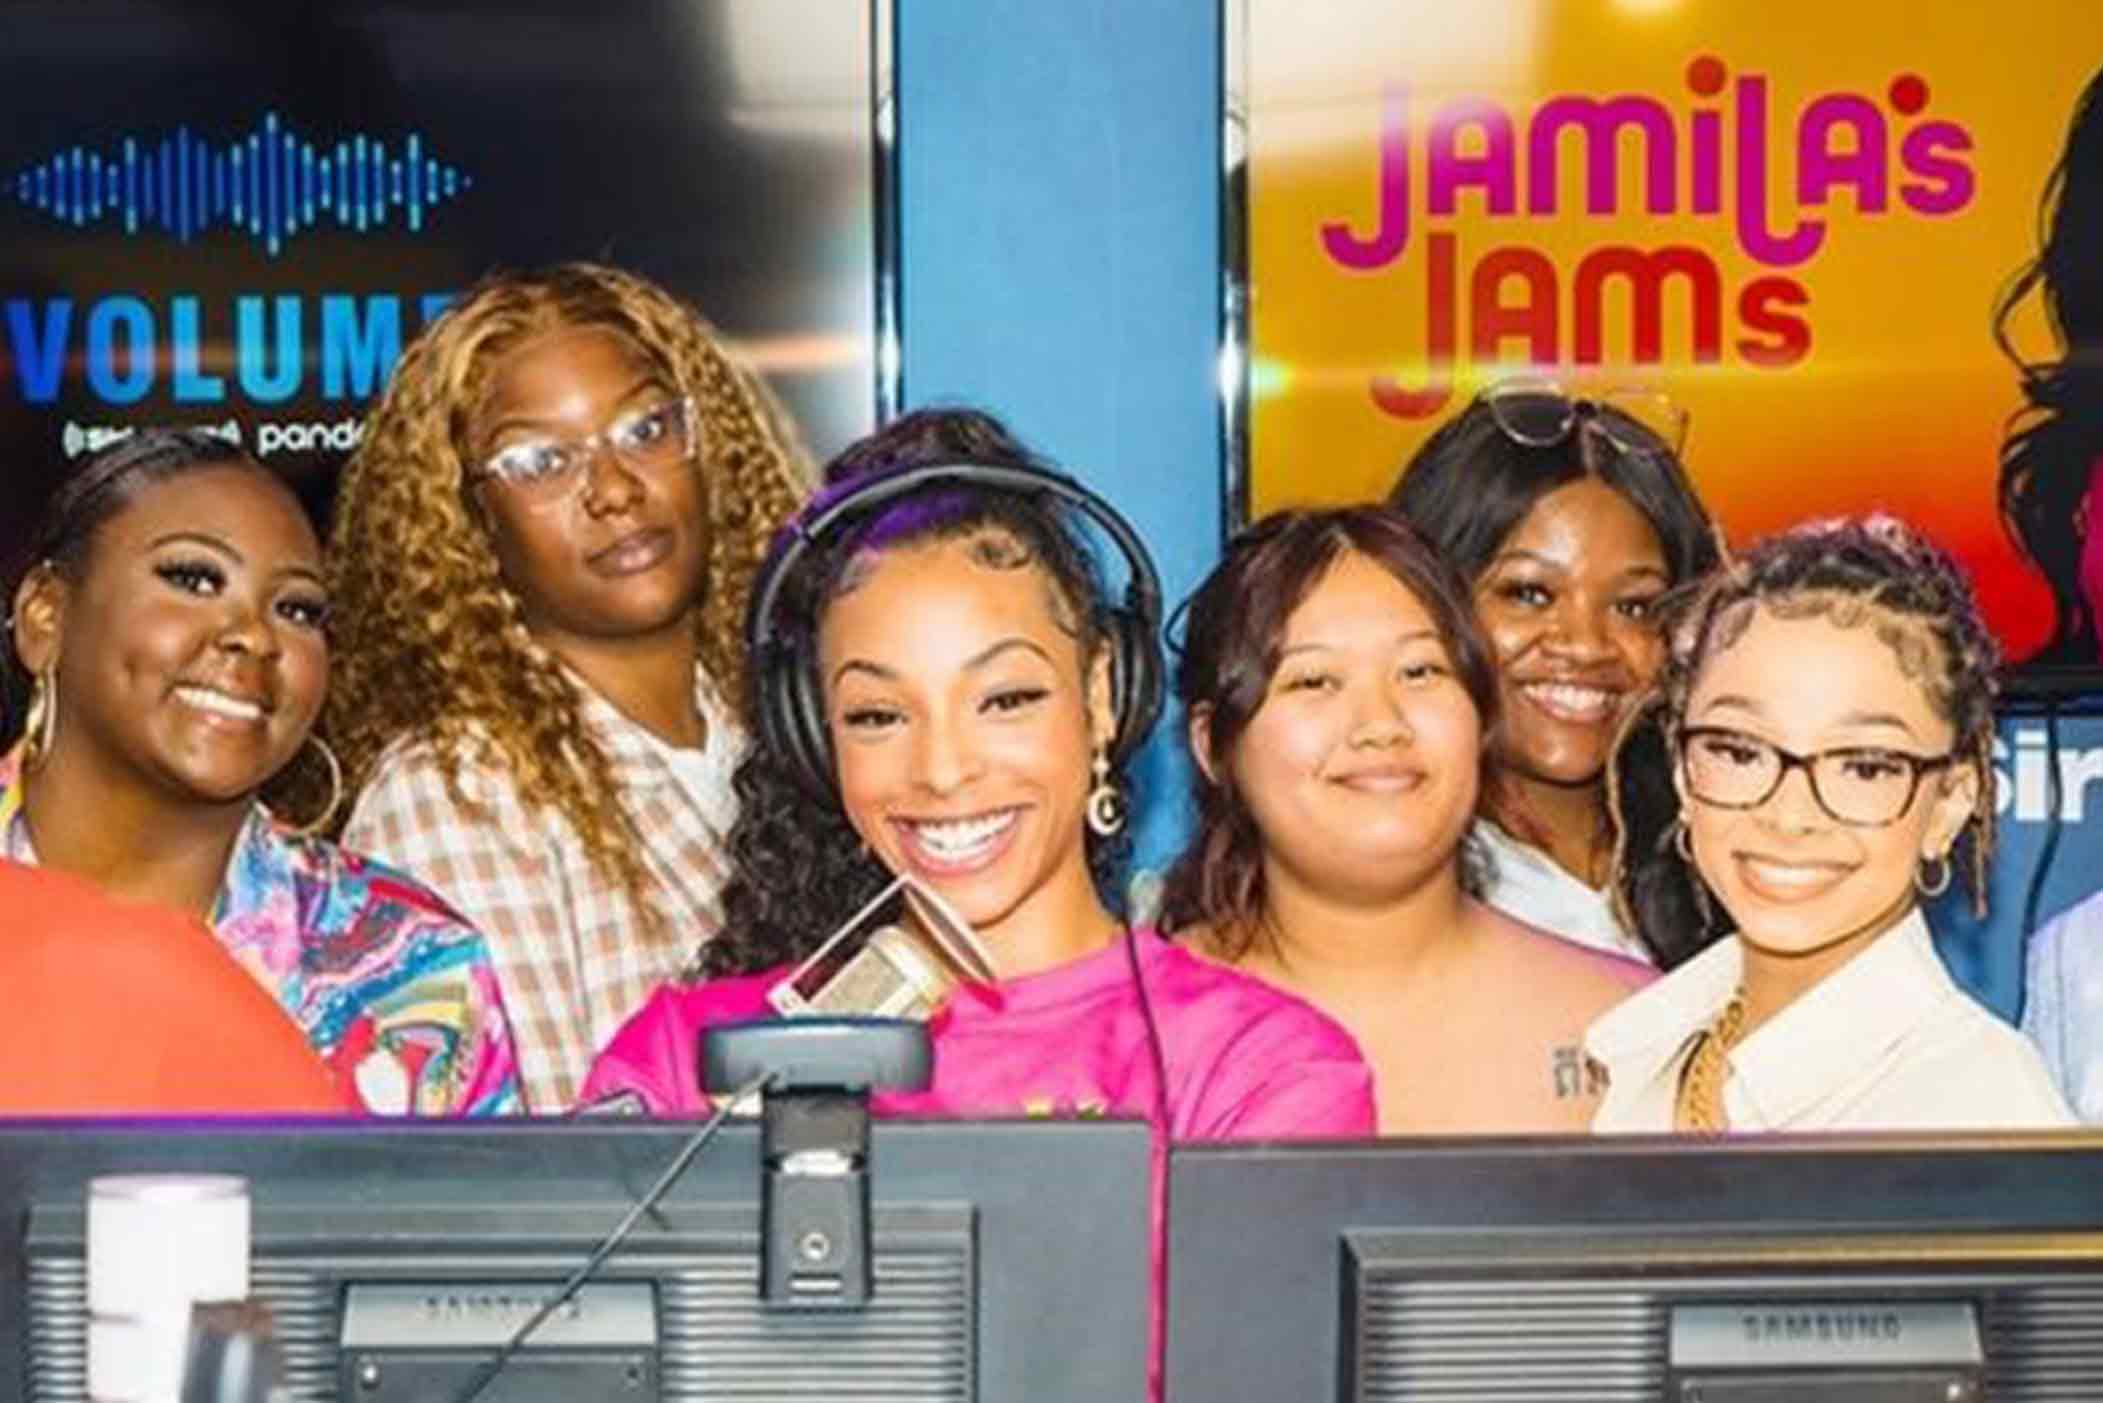 University alumna and Sirius Radio personality Jamila Mustafa poses with a group of Delaware State University students she invited to her show.